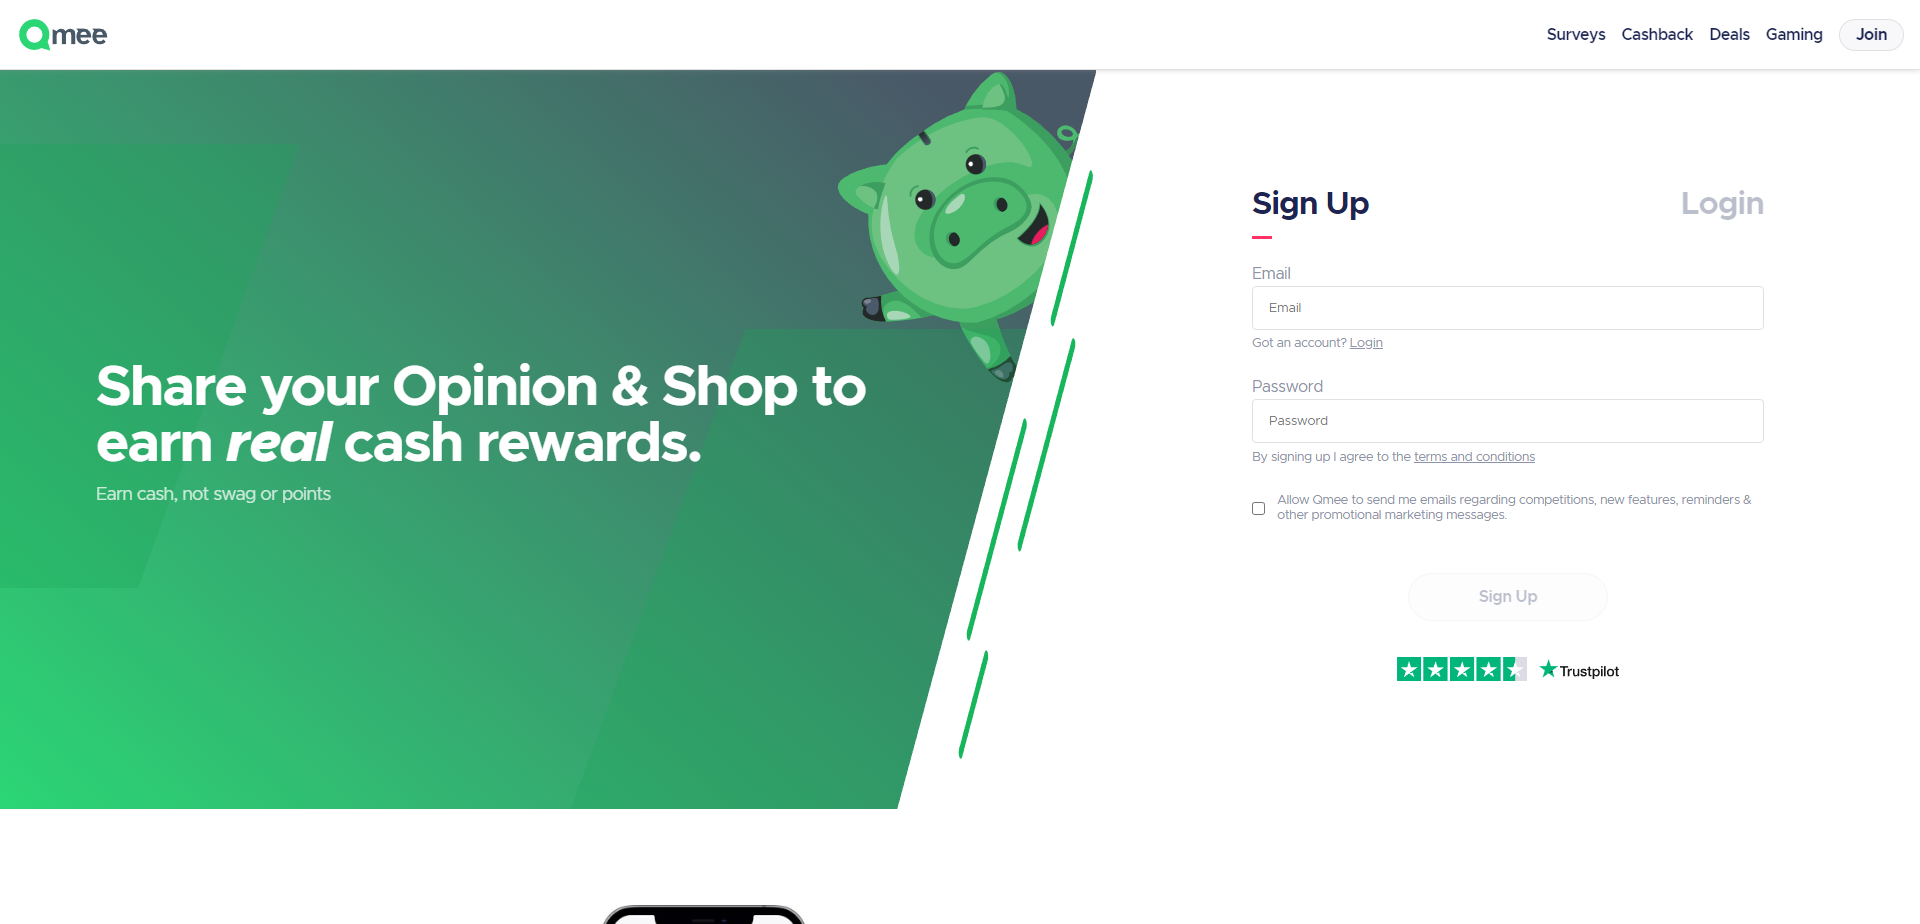 Referral Landing Page for Qmee